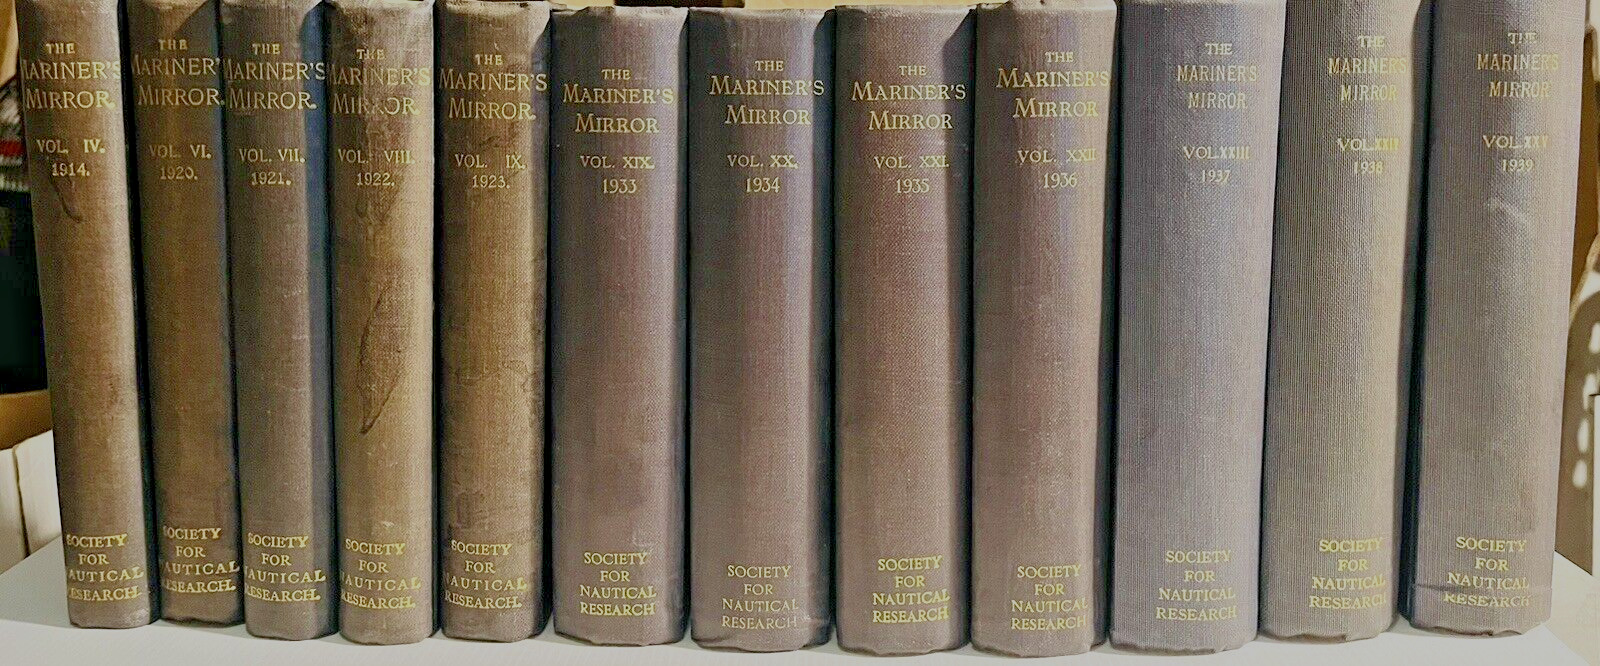 The Mariner's Mirror 12 Volumes Hardcover 1914 to 1939 Society Nautical Research